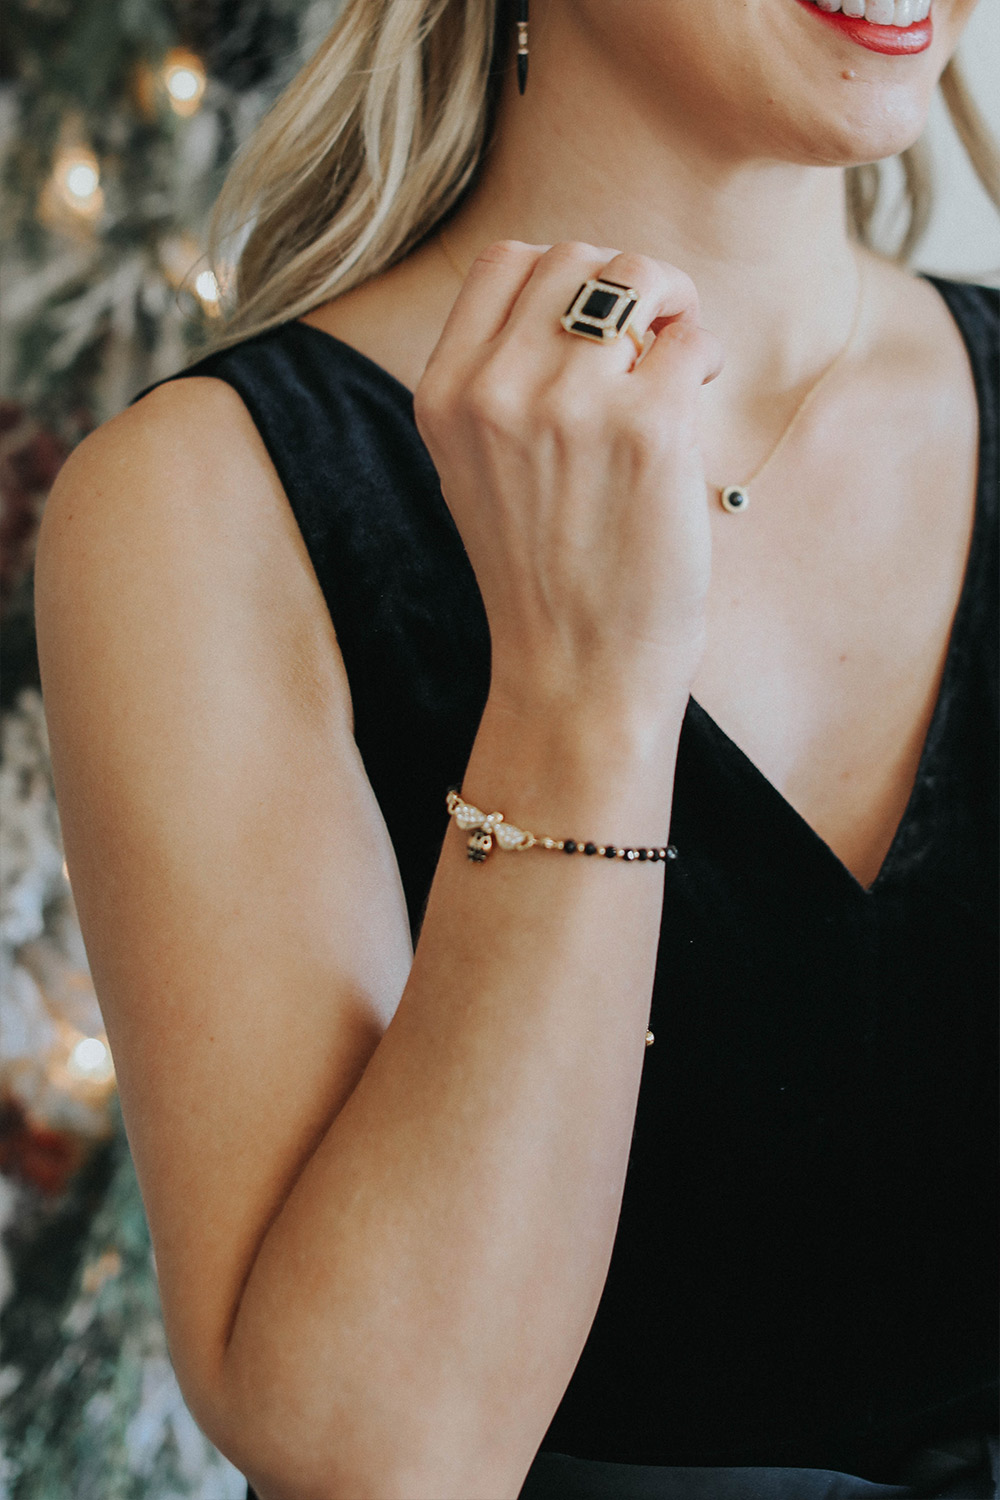 doves cocktail ring and halcyon days bangle